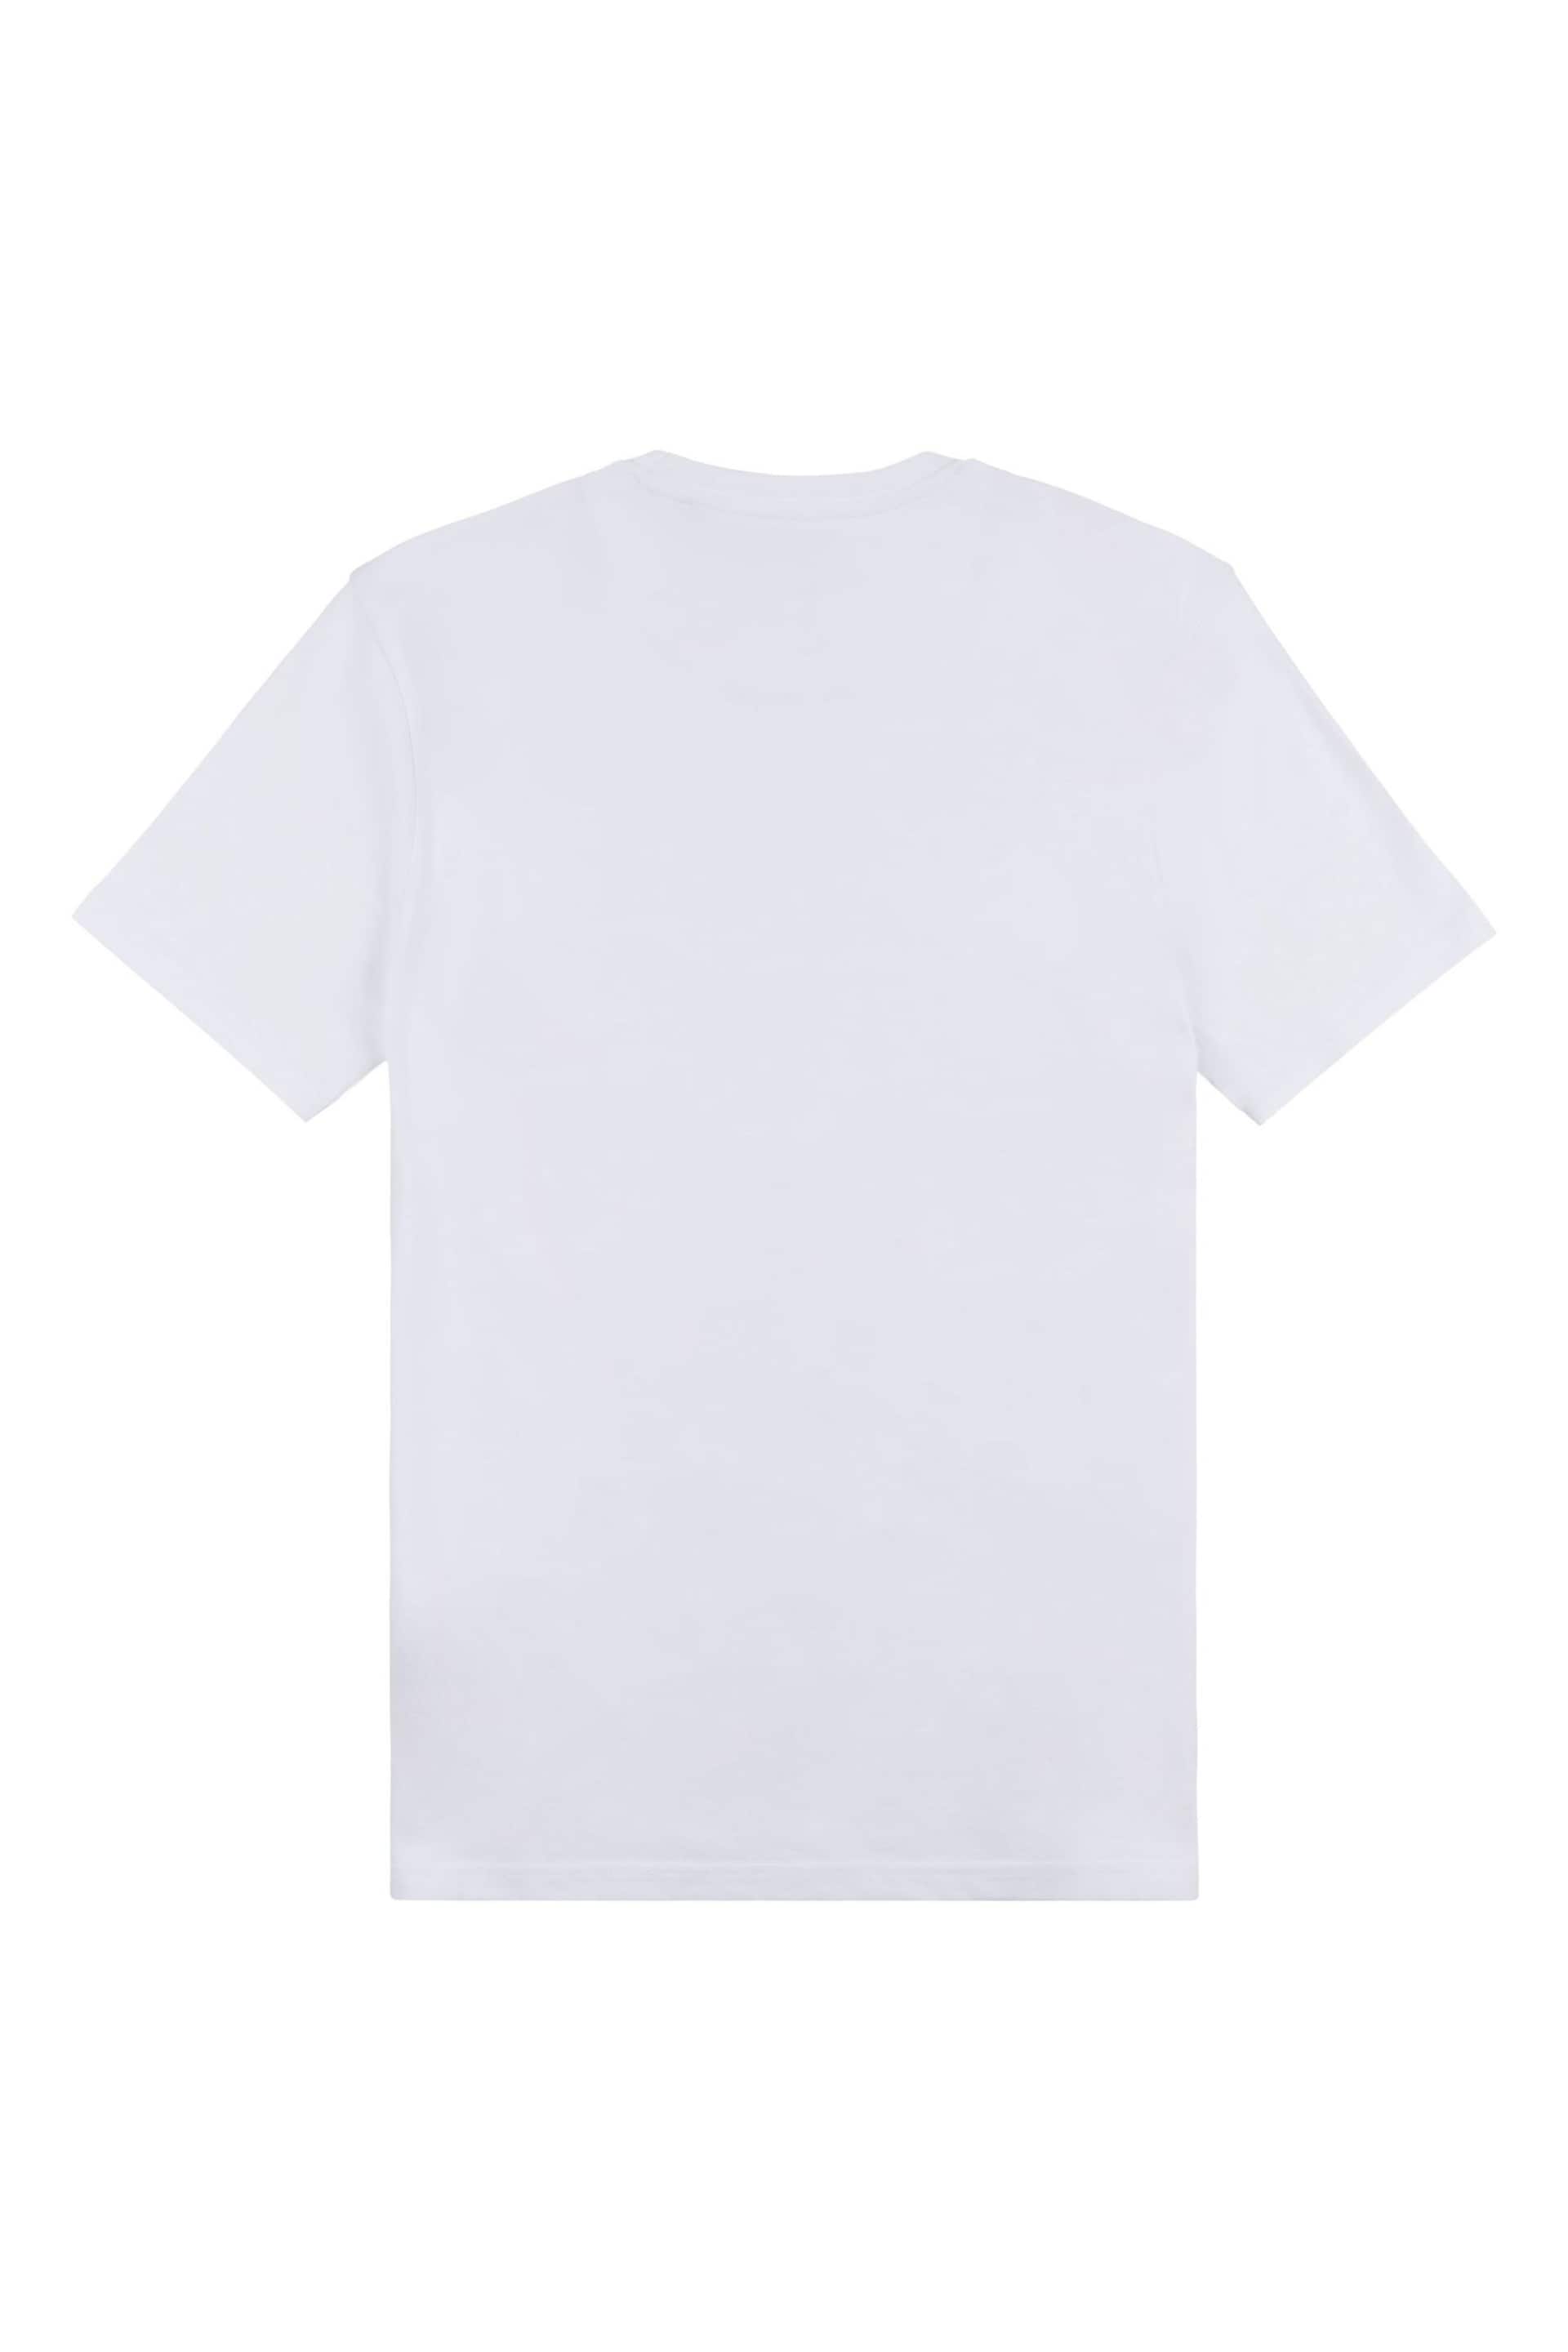 Flyers Mens Classic Fit T-Shirt - Image 7 of 8